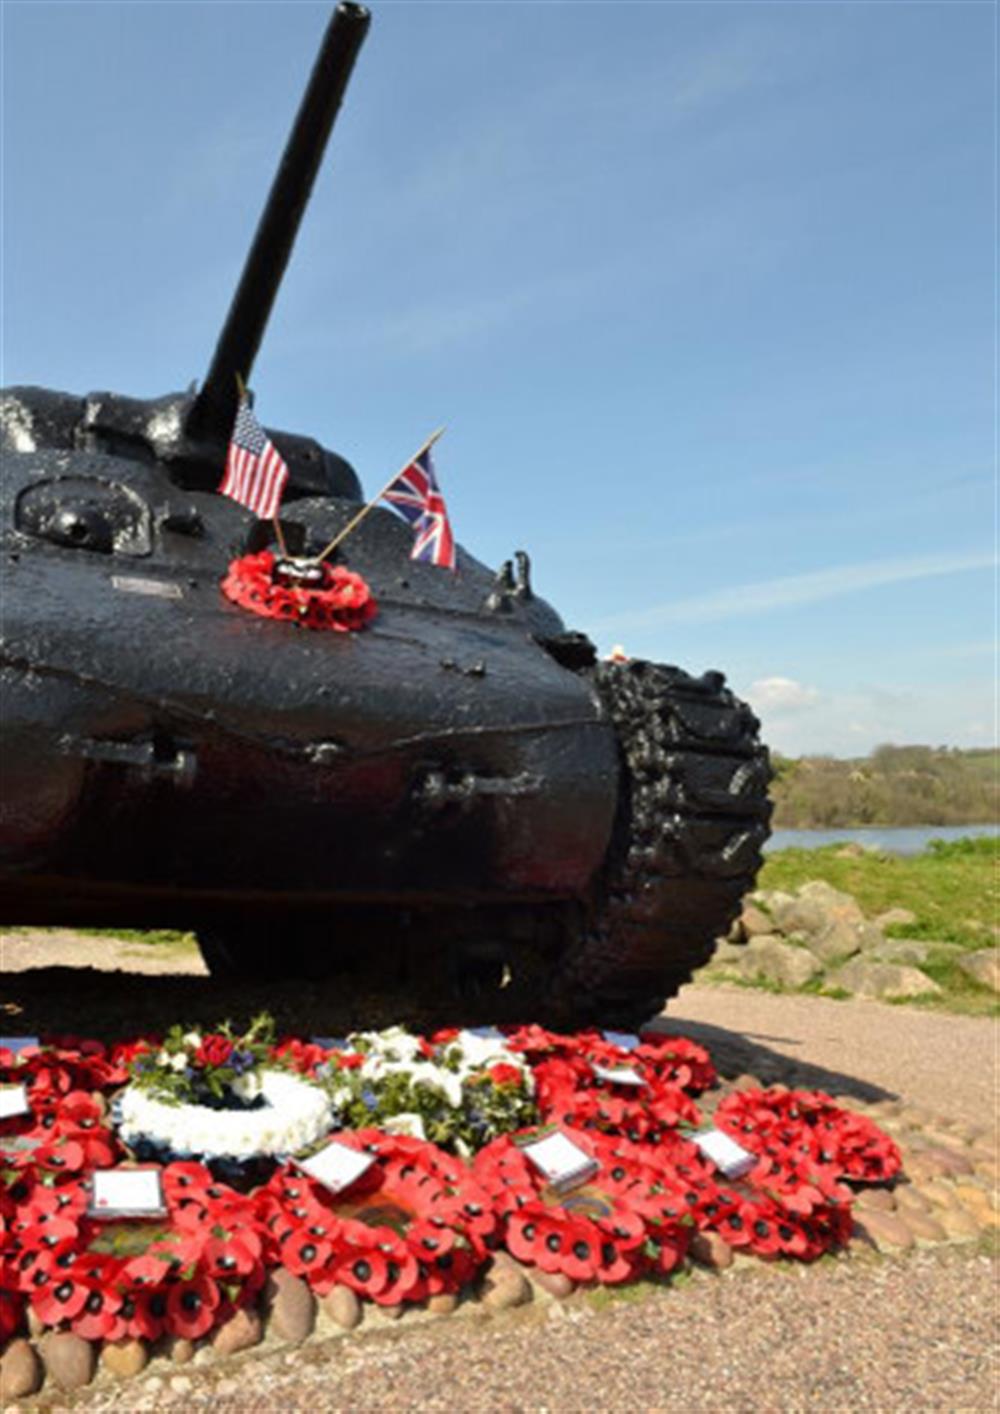 The tank at Torcross, a memorial to Operation Tiger at Upper Reeds in Torcross